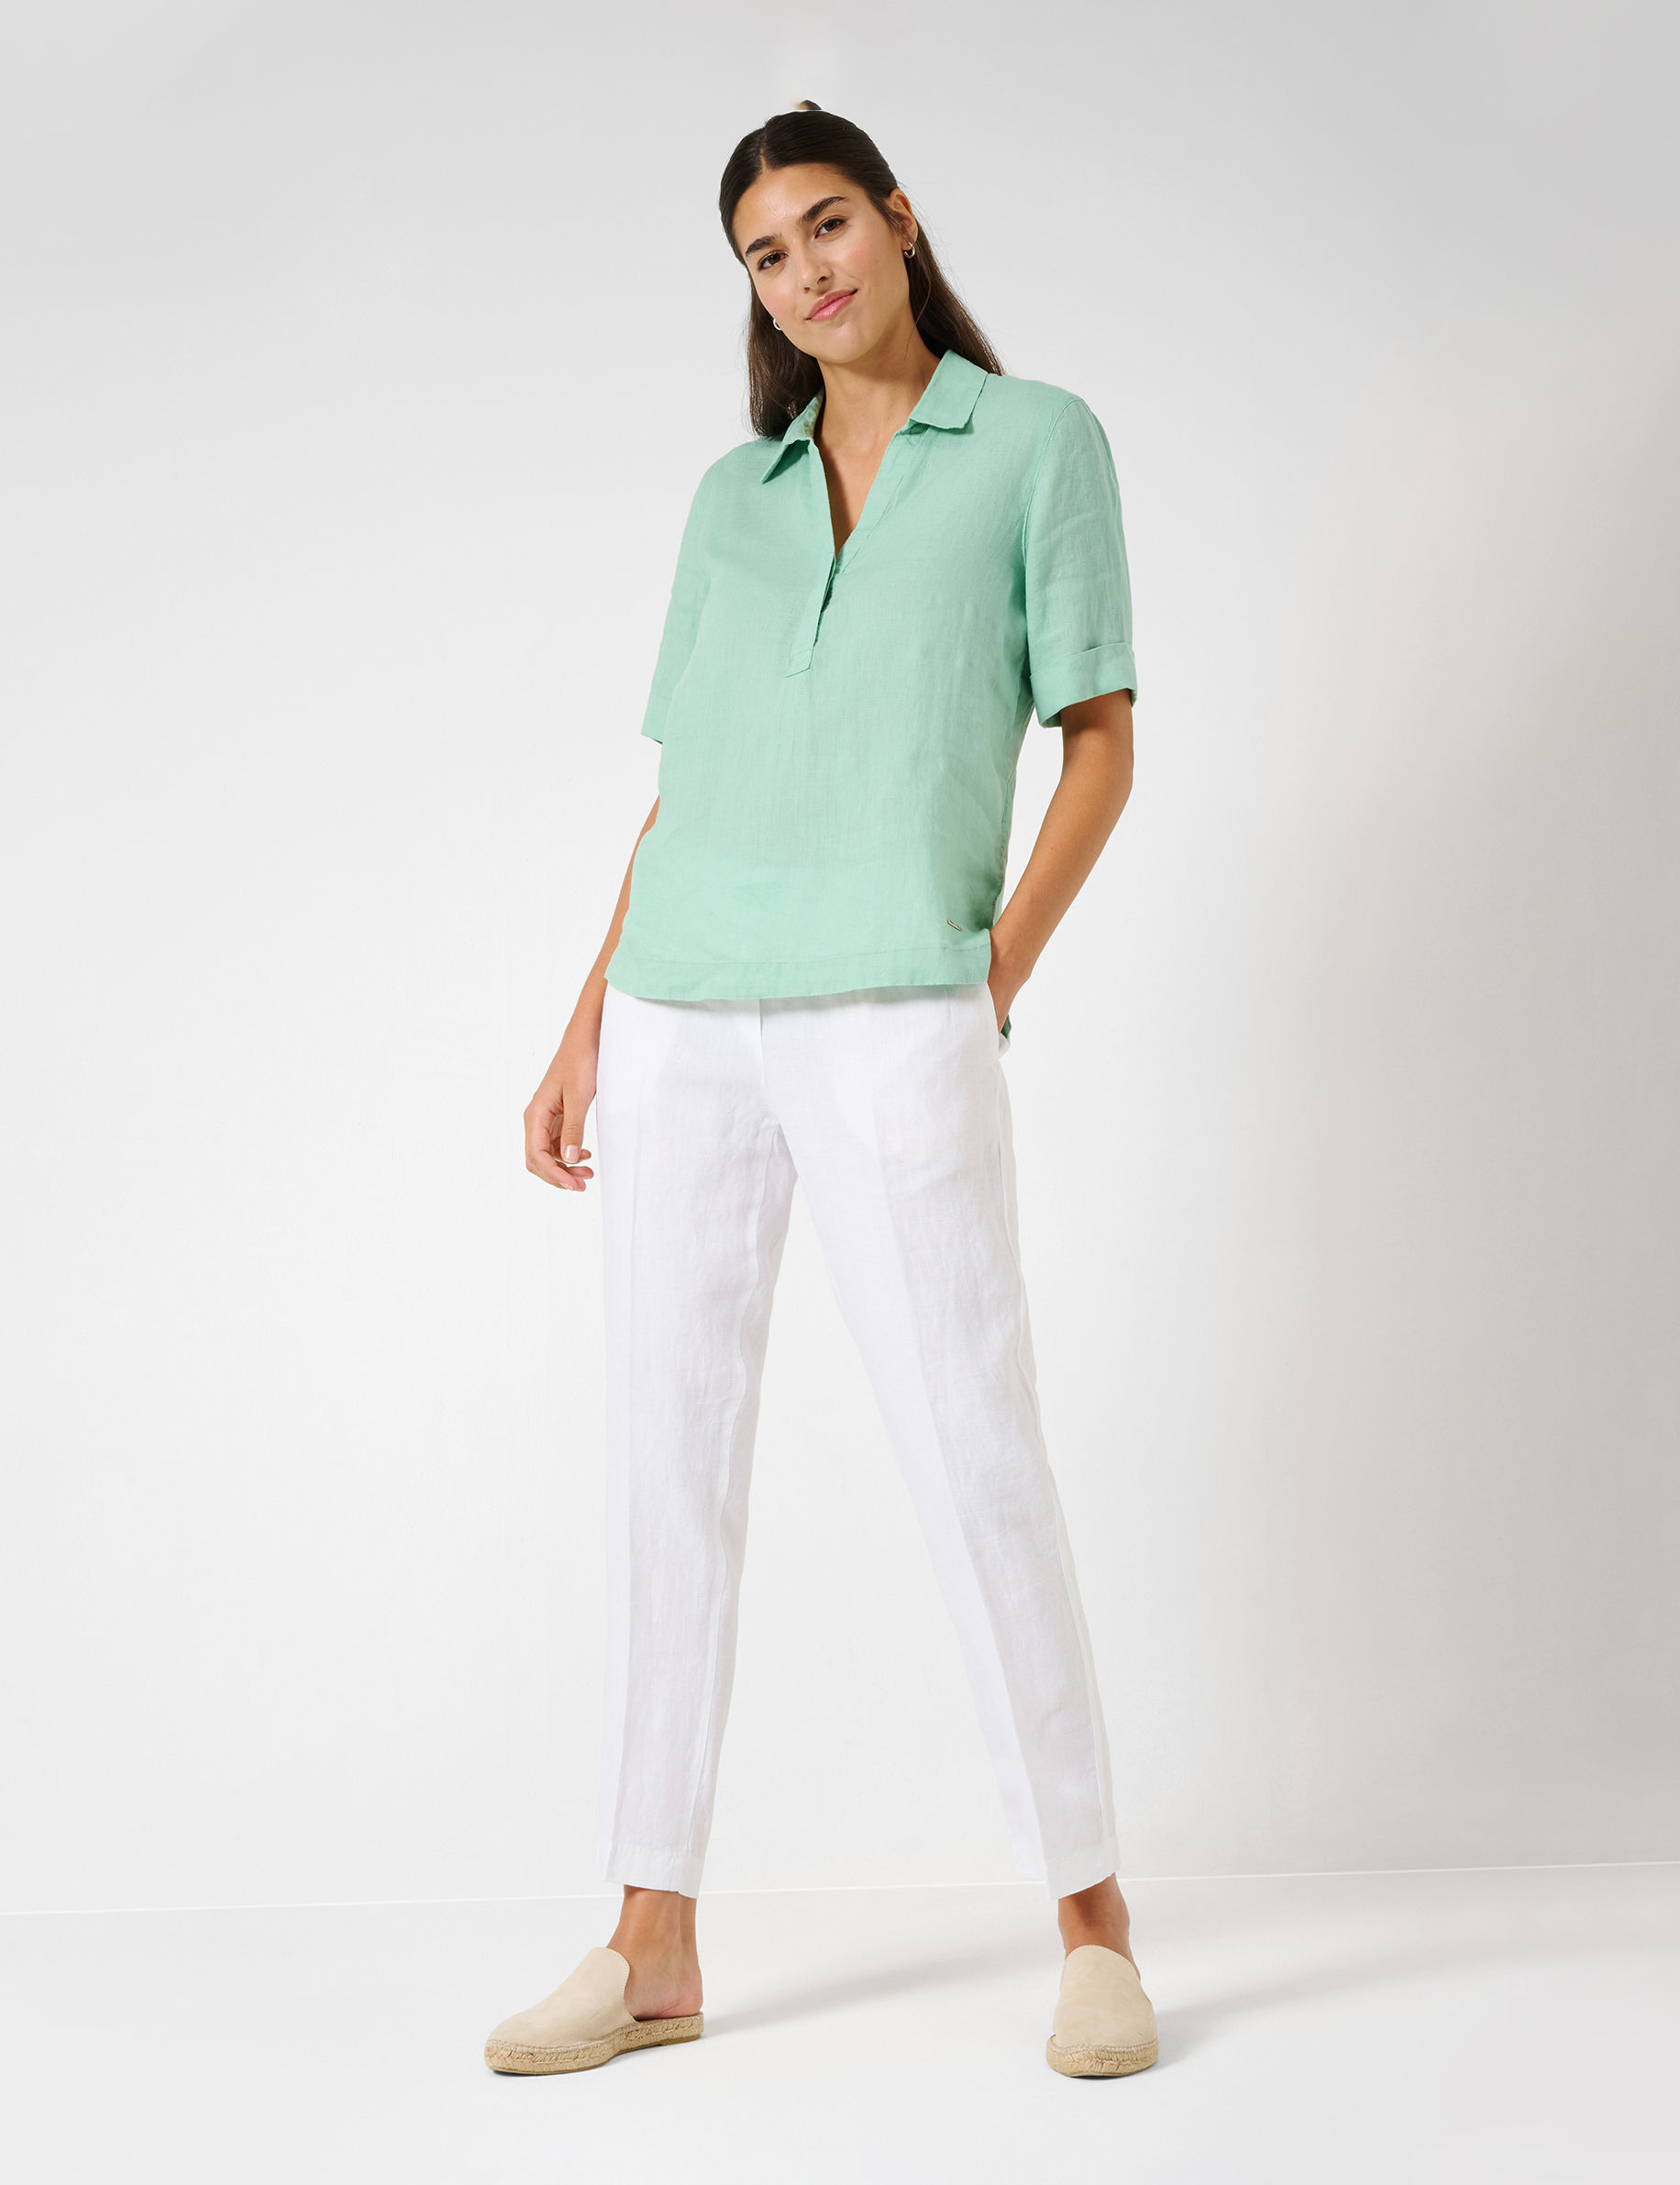 Women Style VIO mint  Model Outfit